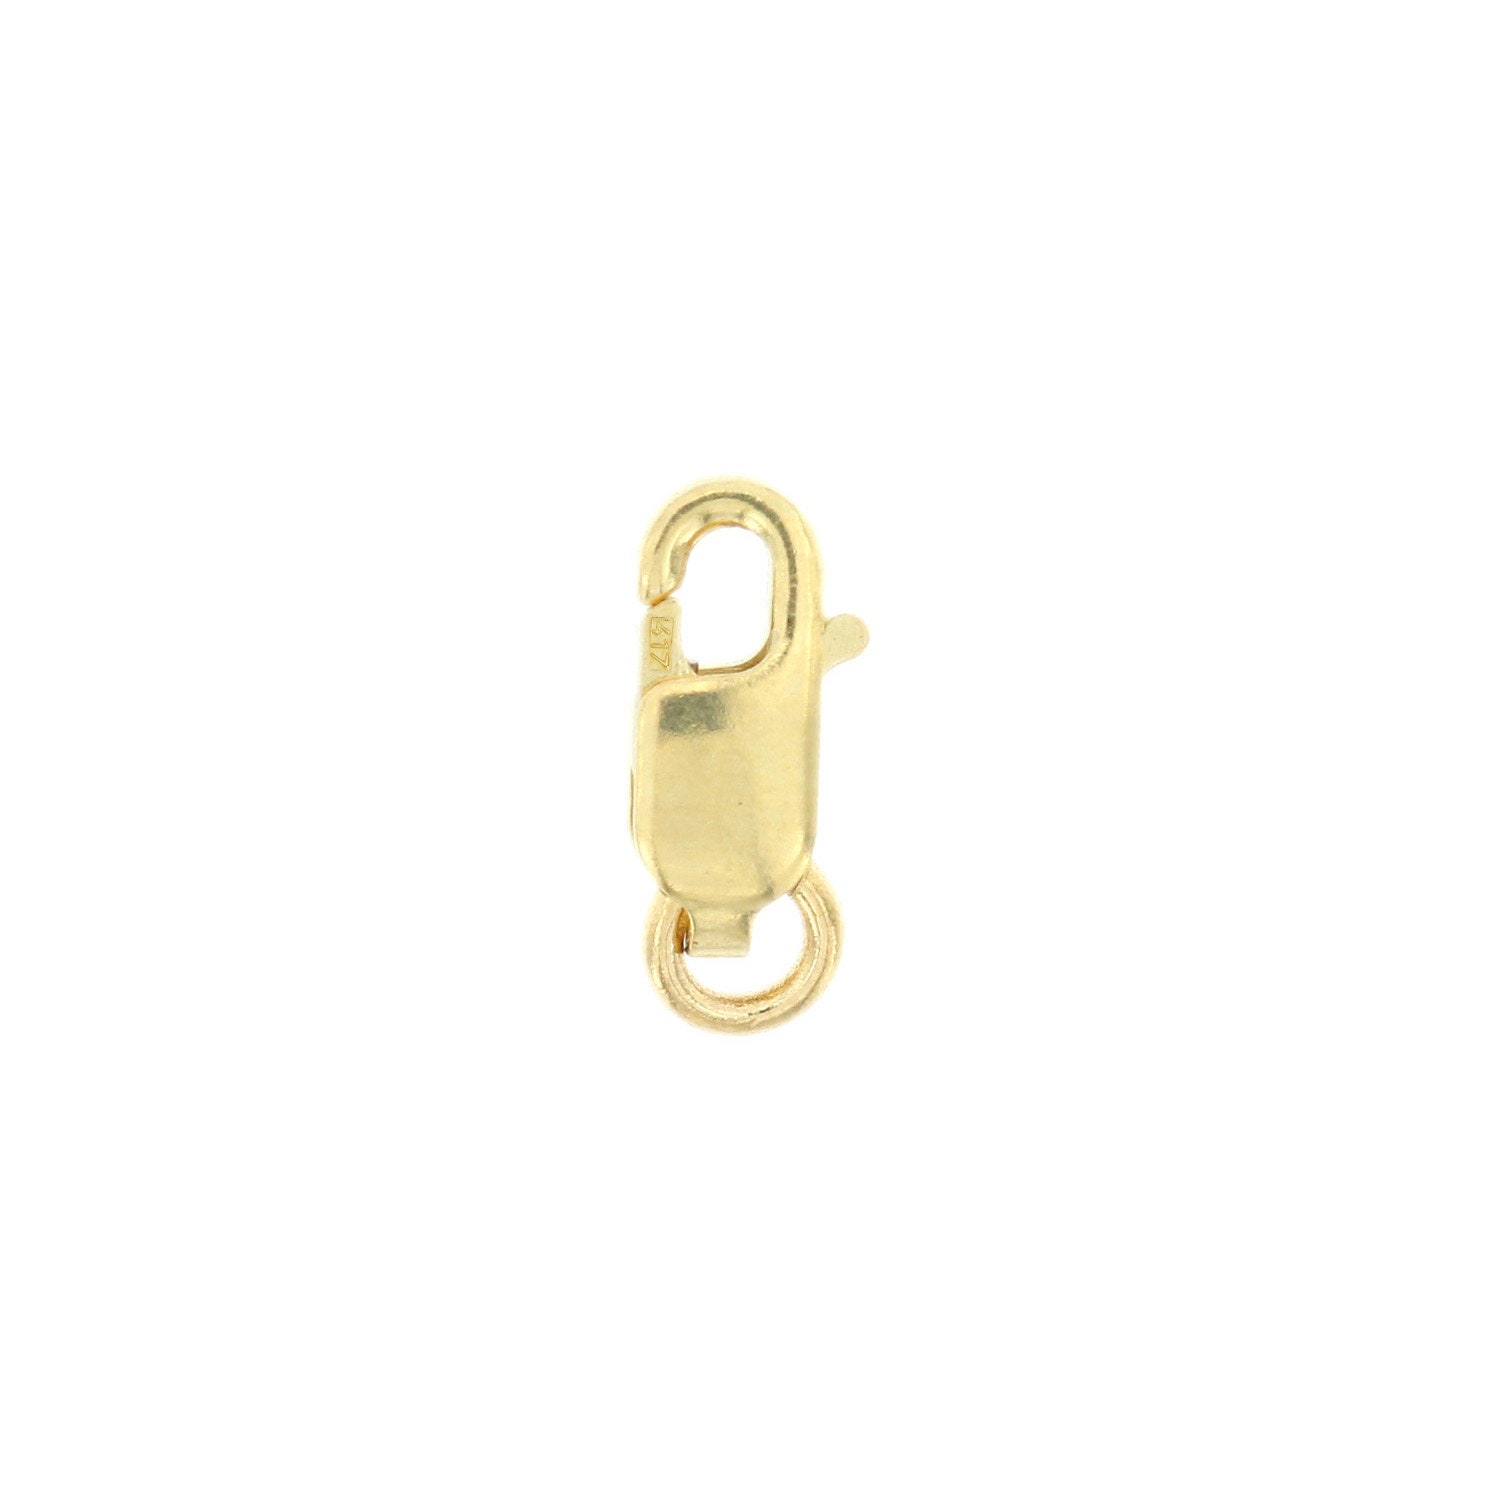 10k White & Yellow Gold Lobster Claw Clasp Bracelet Chain Replacement Lock  417 - Findings Outlet